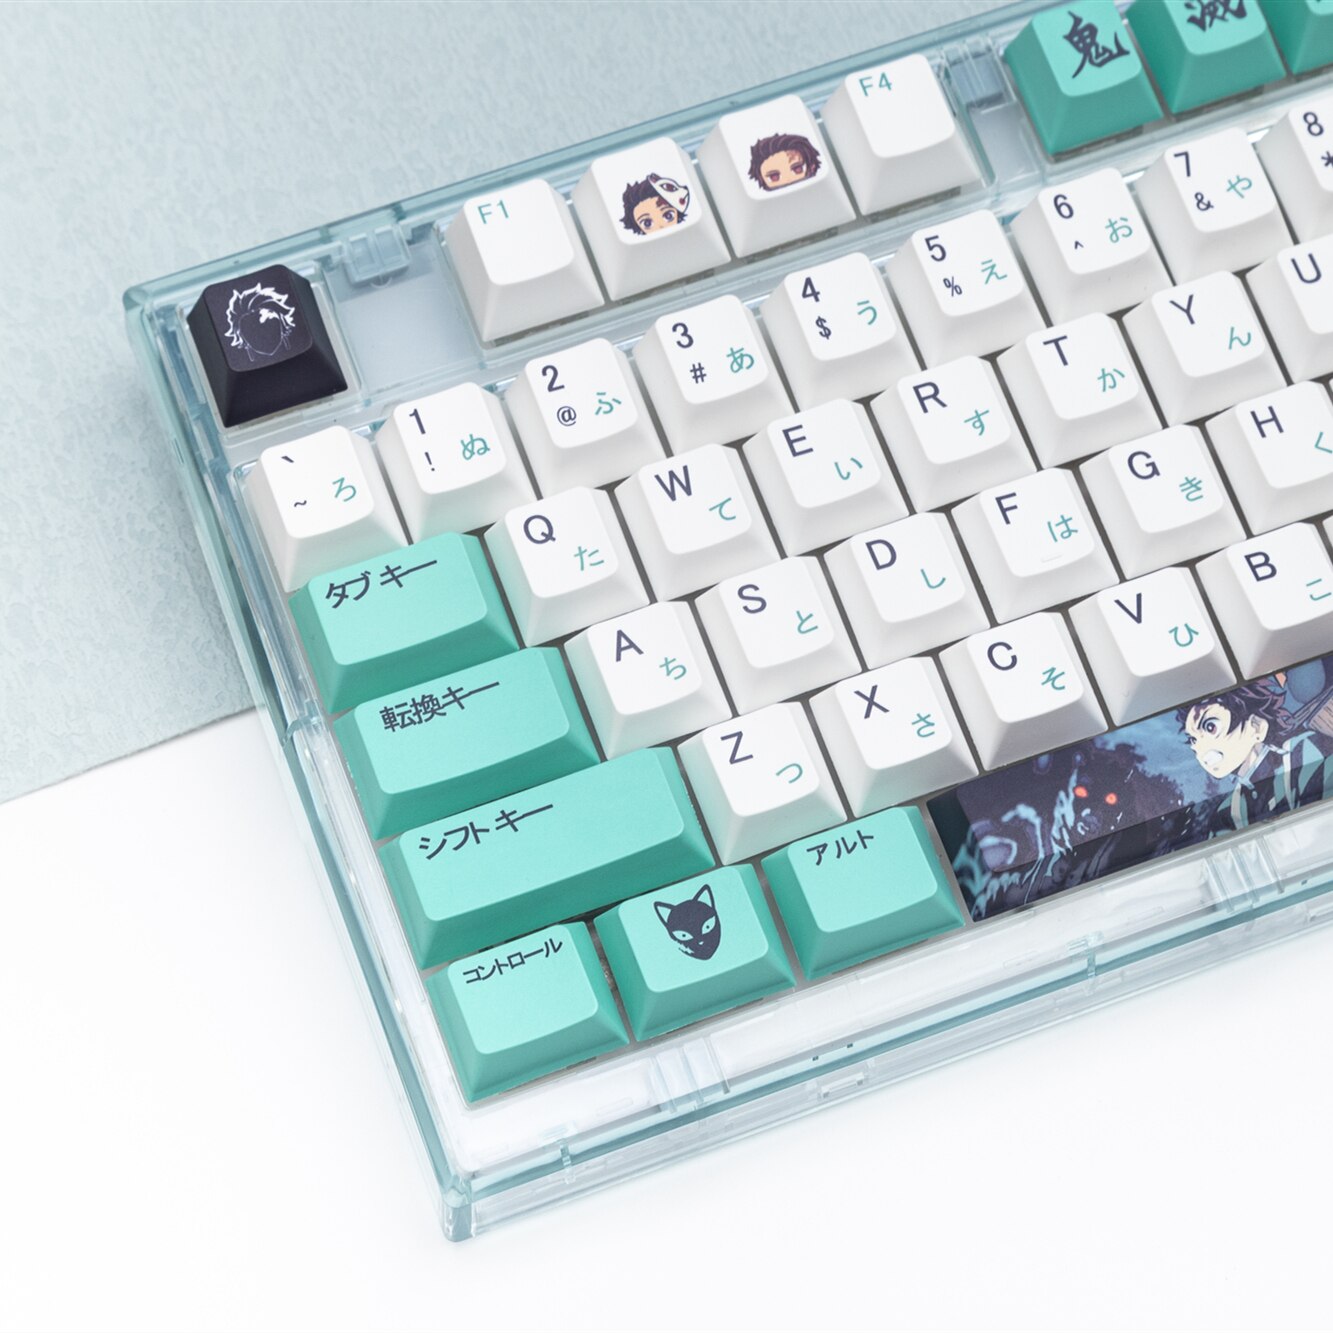 PBT 71 key Ahegao Keycap Dye Sublimation OEM Profile Japanese Anime Keycap  For Cherry Gateron Kailh switch GK61 GK64 Keyboard - Price history & Review  | AliExpress Seller - Cool Jazz Store | Alitools.io